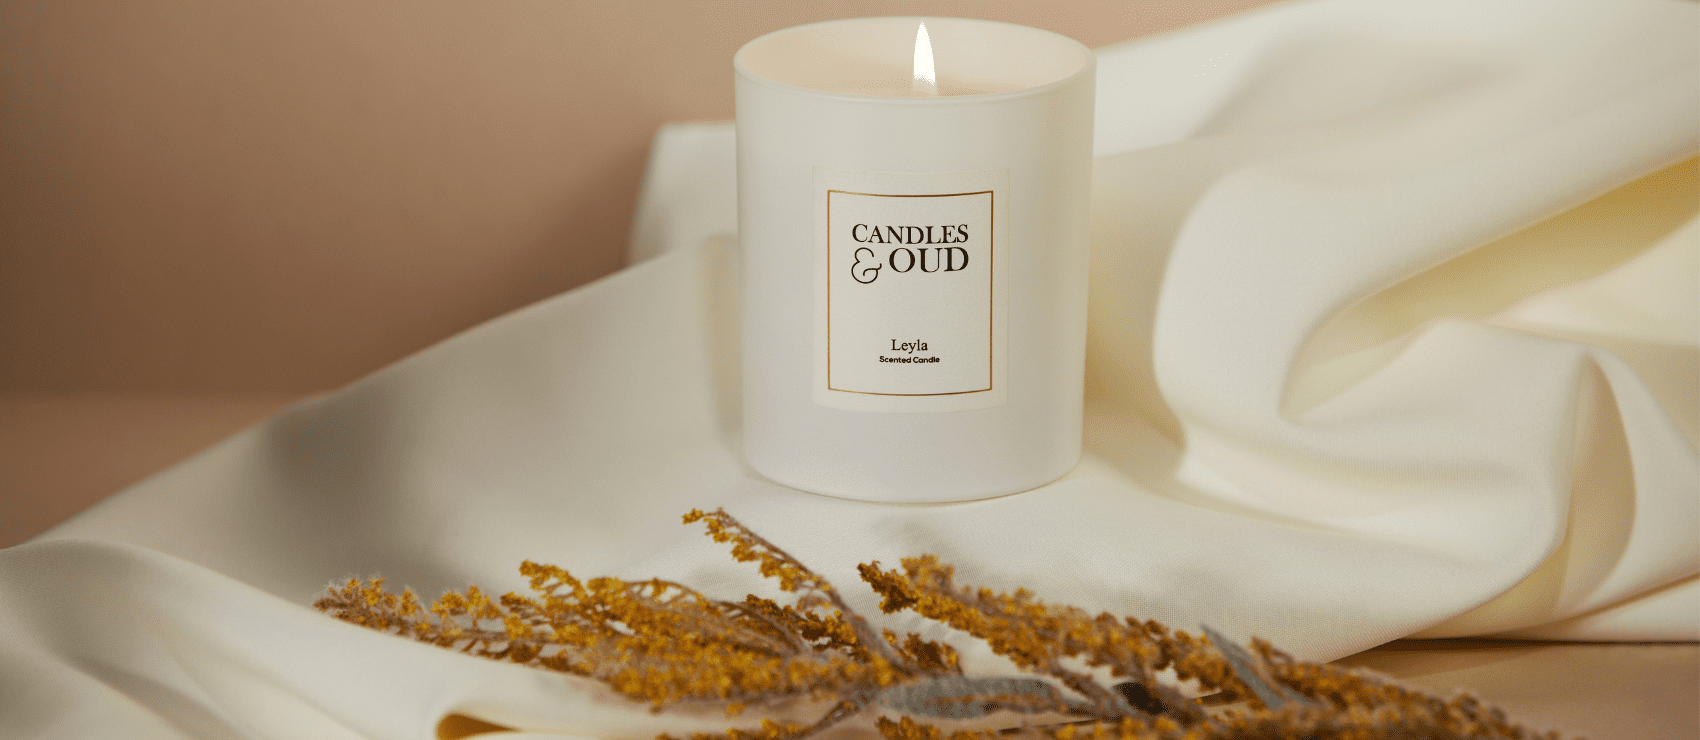 Full Time Candles & Oud Sales Executive